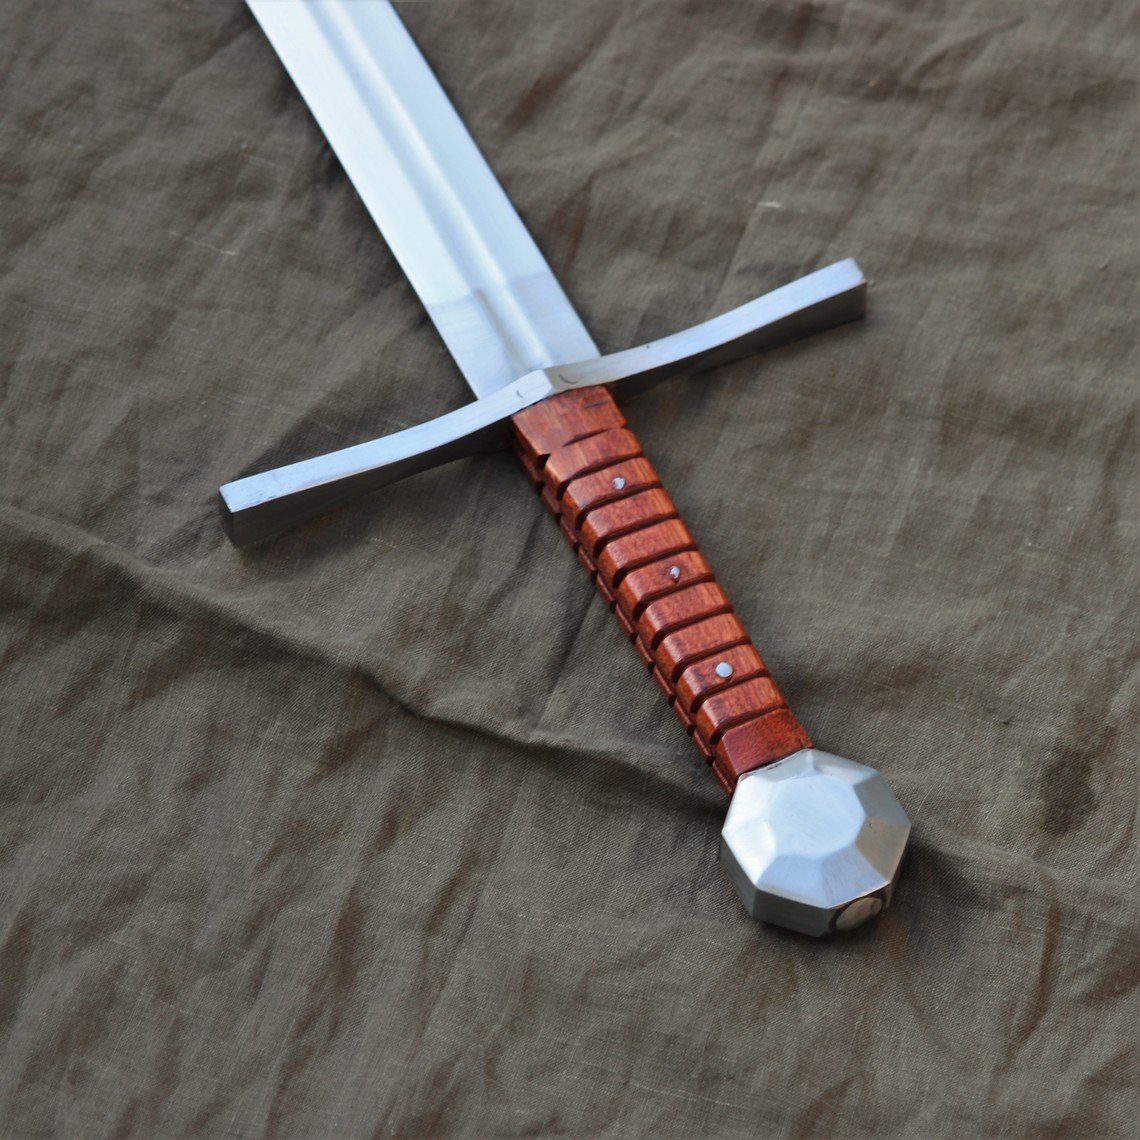 battle ready medieval weapons